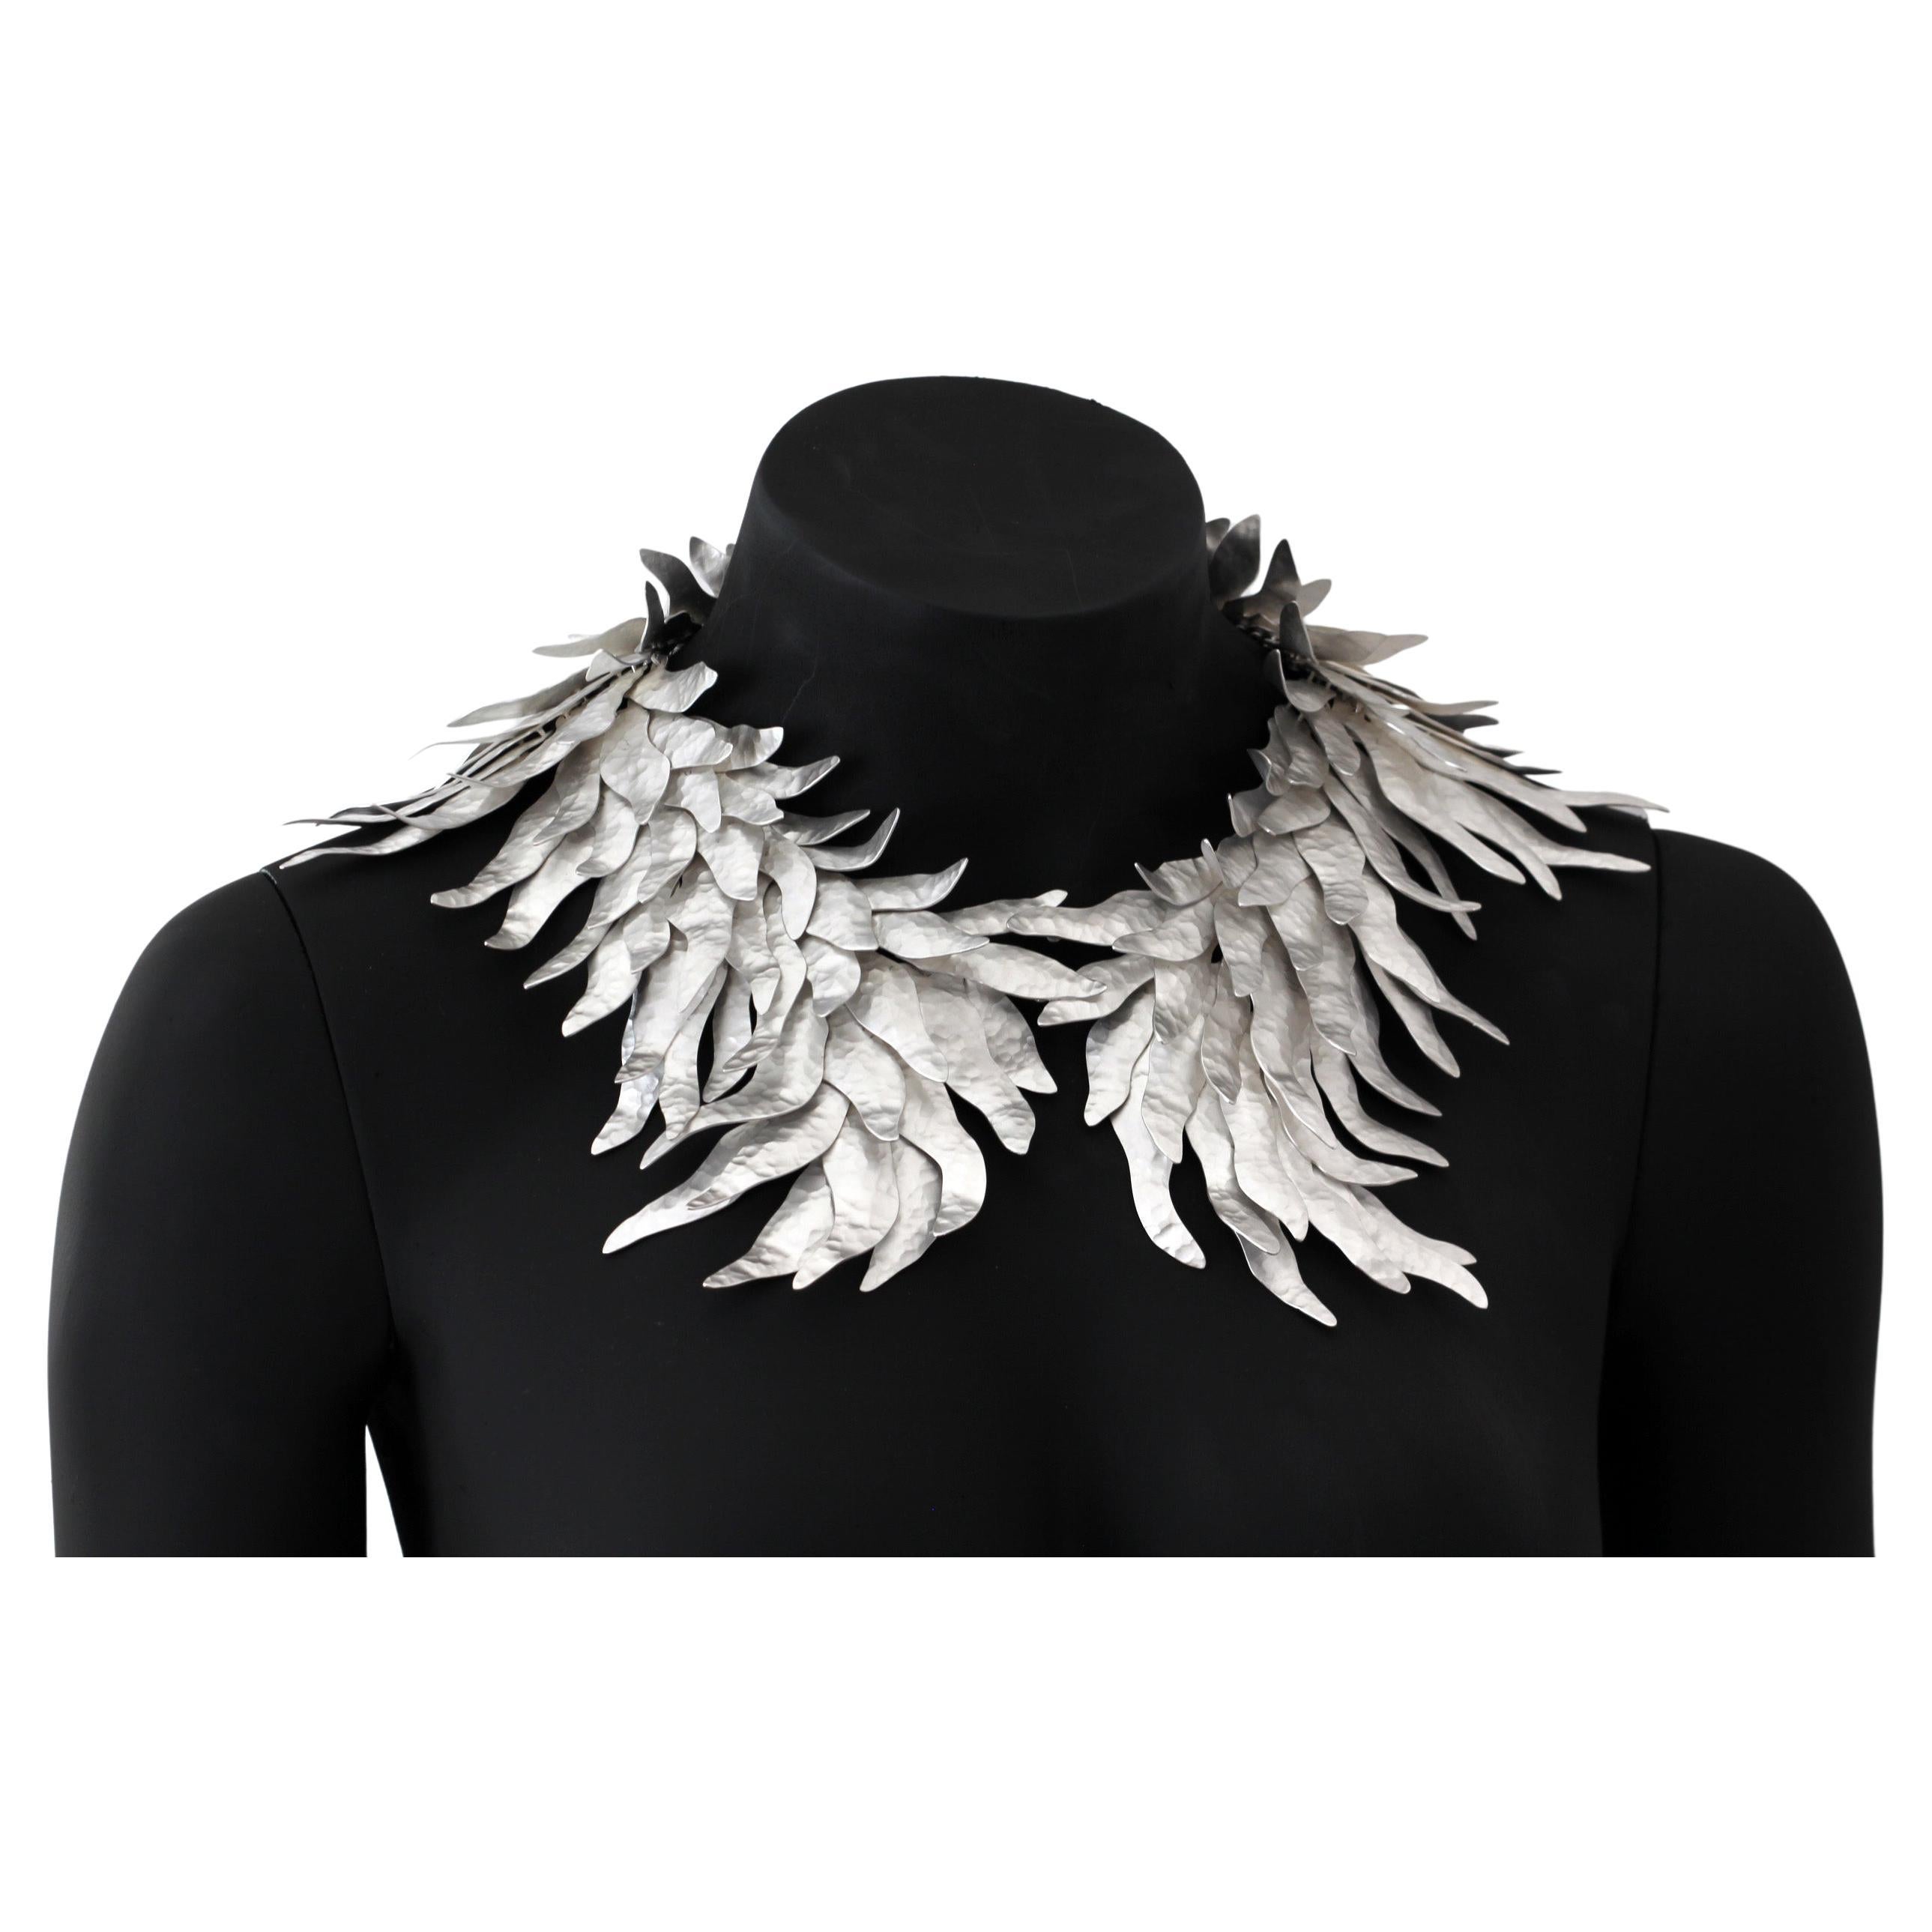 "Feathers" Silver Necklace by Romoherrera